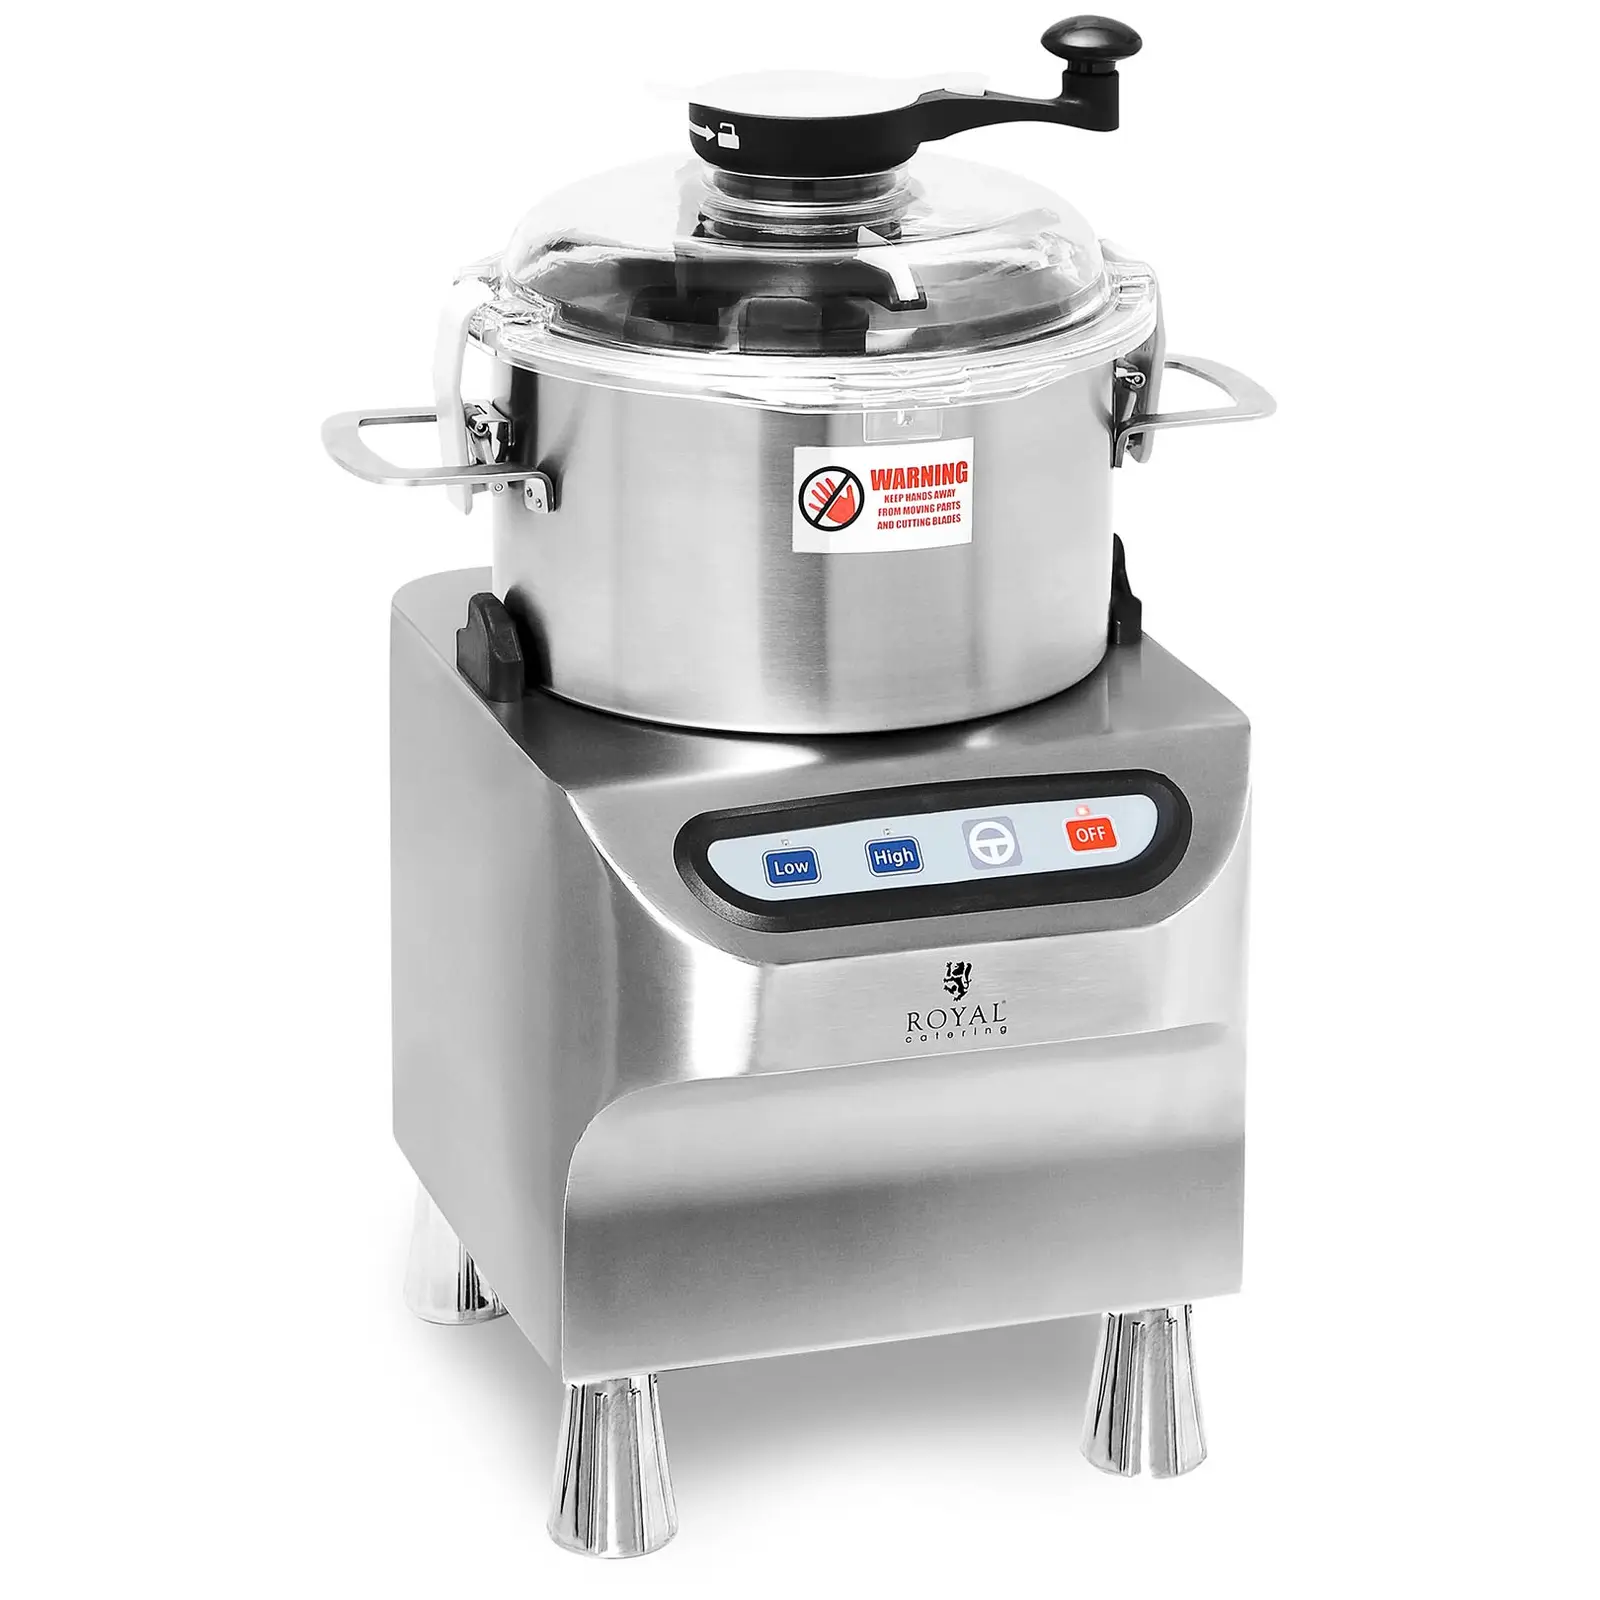 Bowl Cutter - 1500/2800 rpm - Royal Catering - 5 L